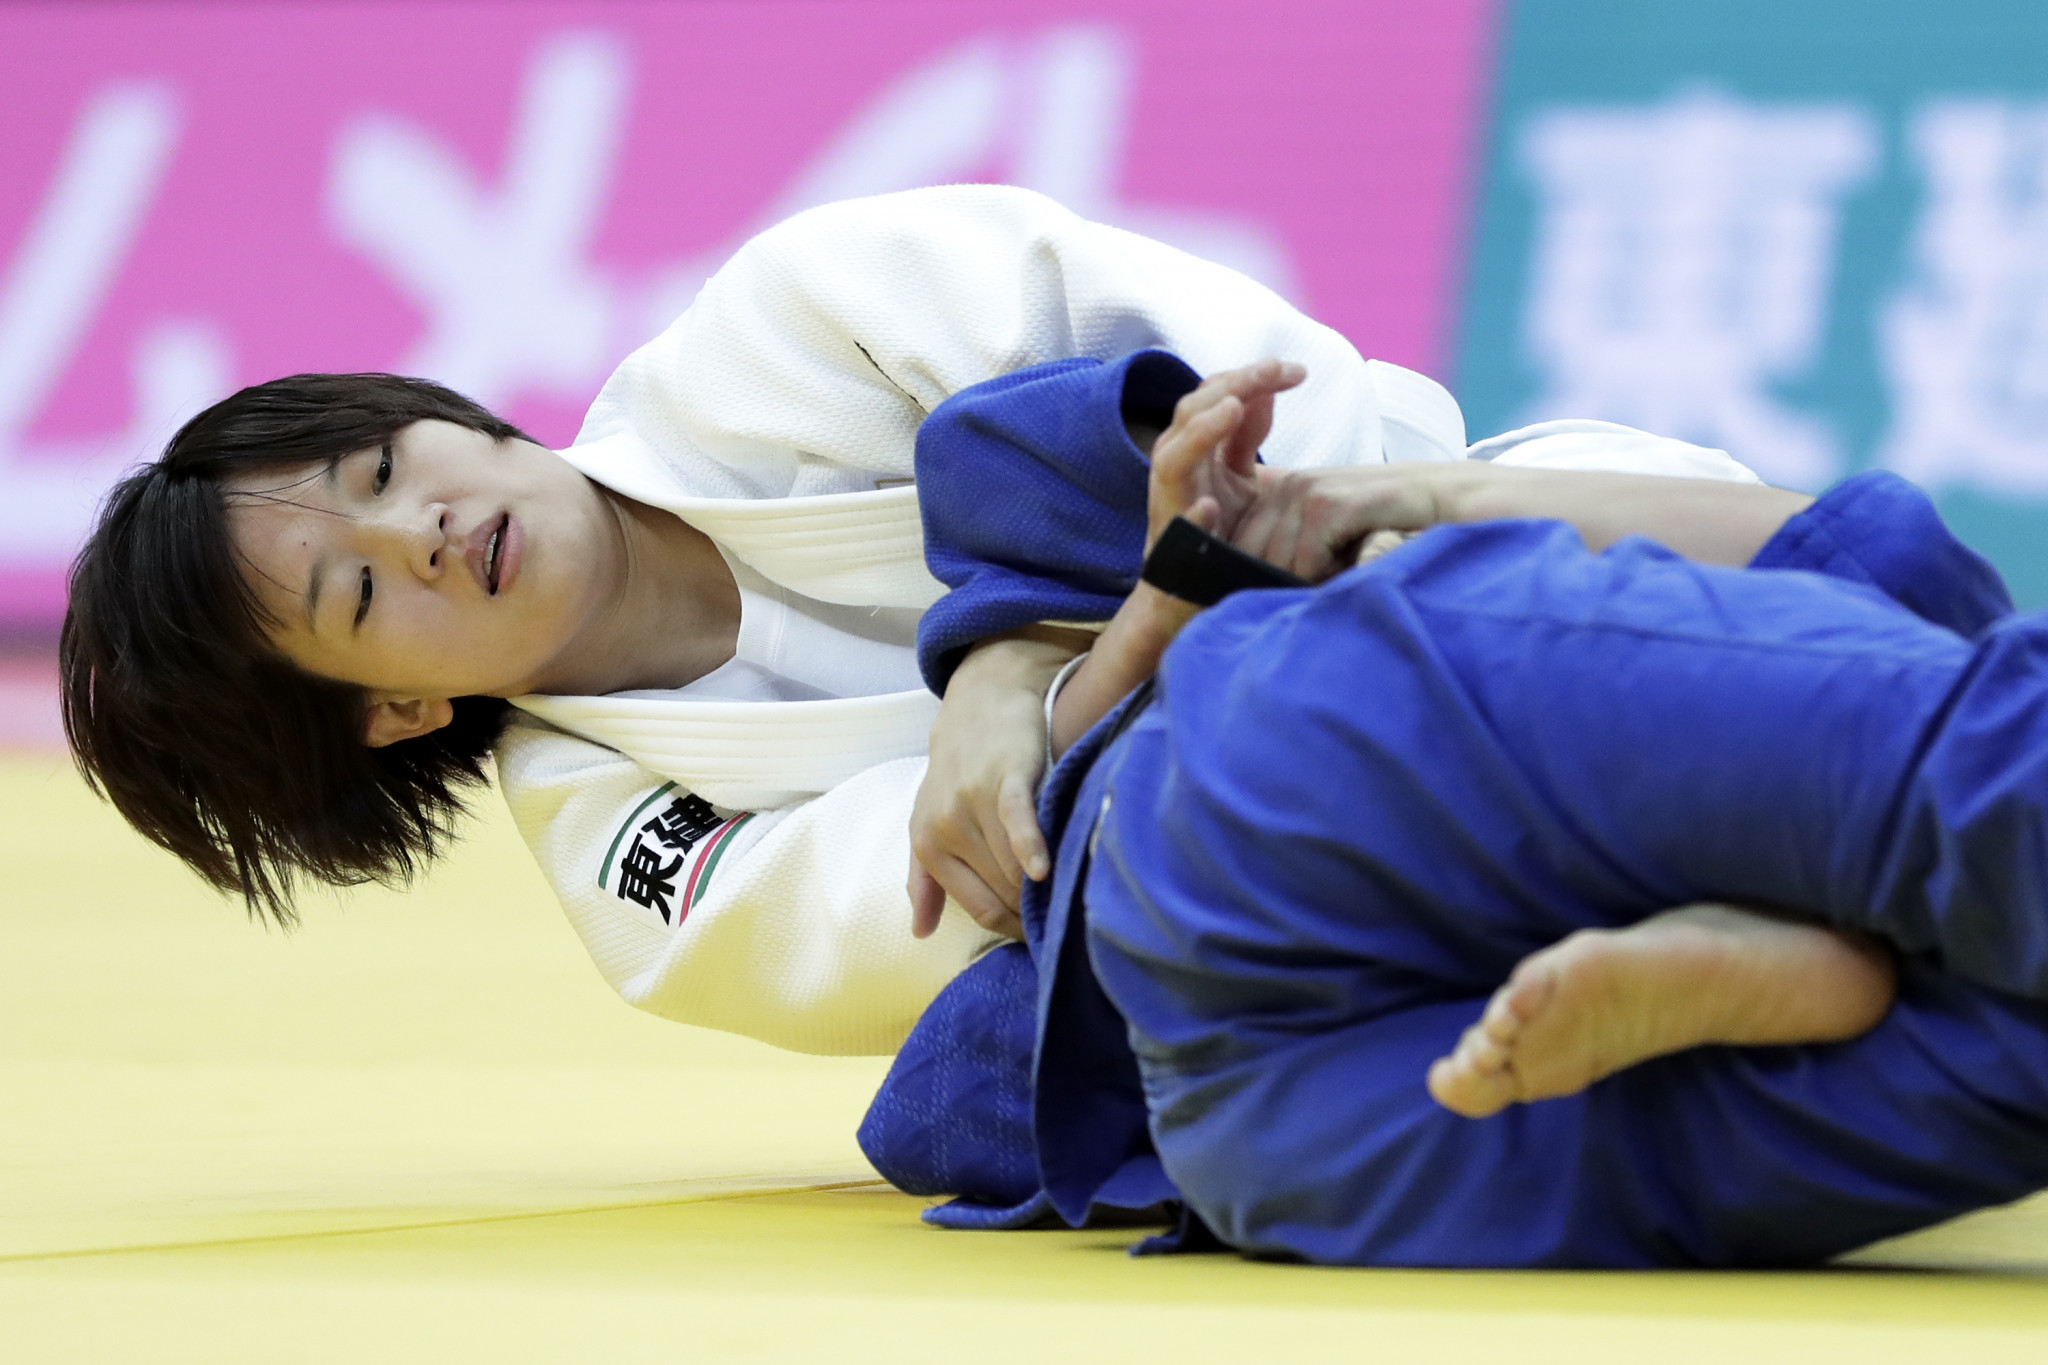 Japan's Chizuru Arai dominated her event as the hosts continued their gold medal haul ©Getty Images